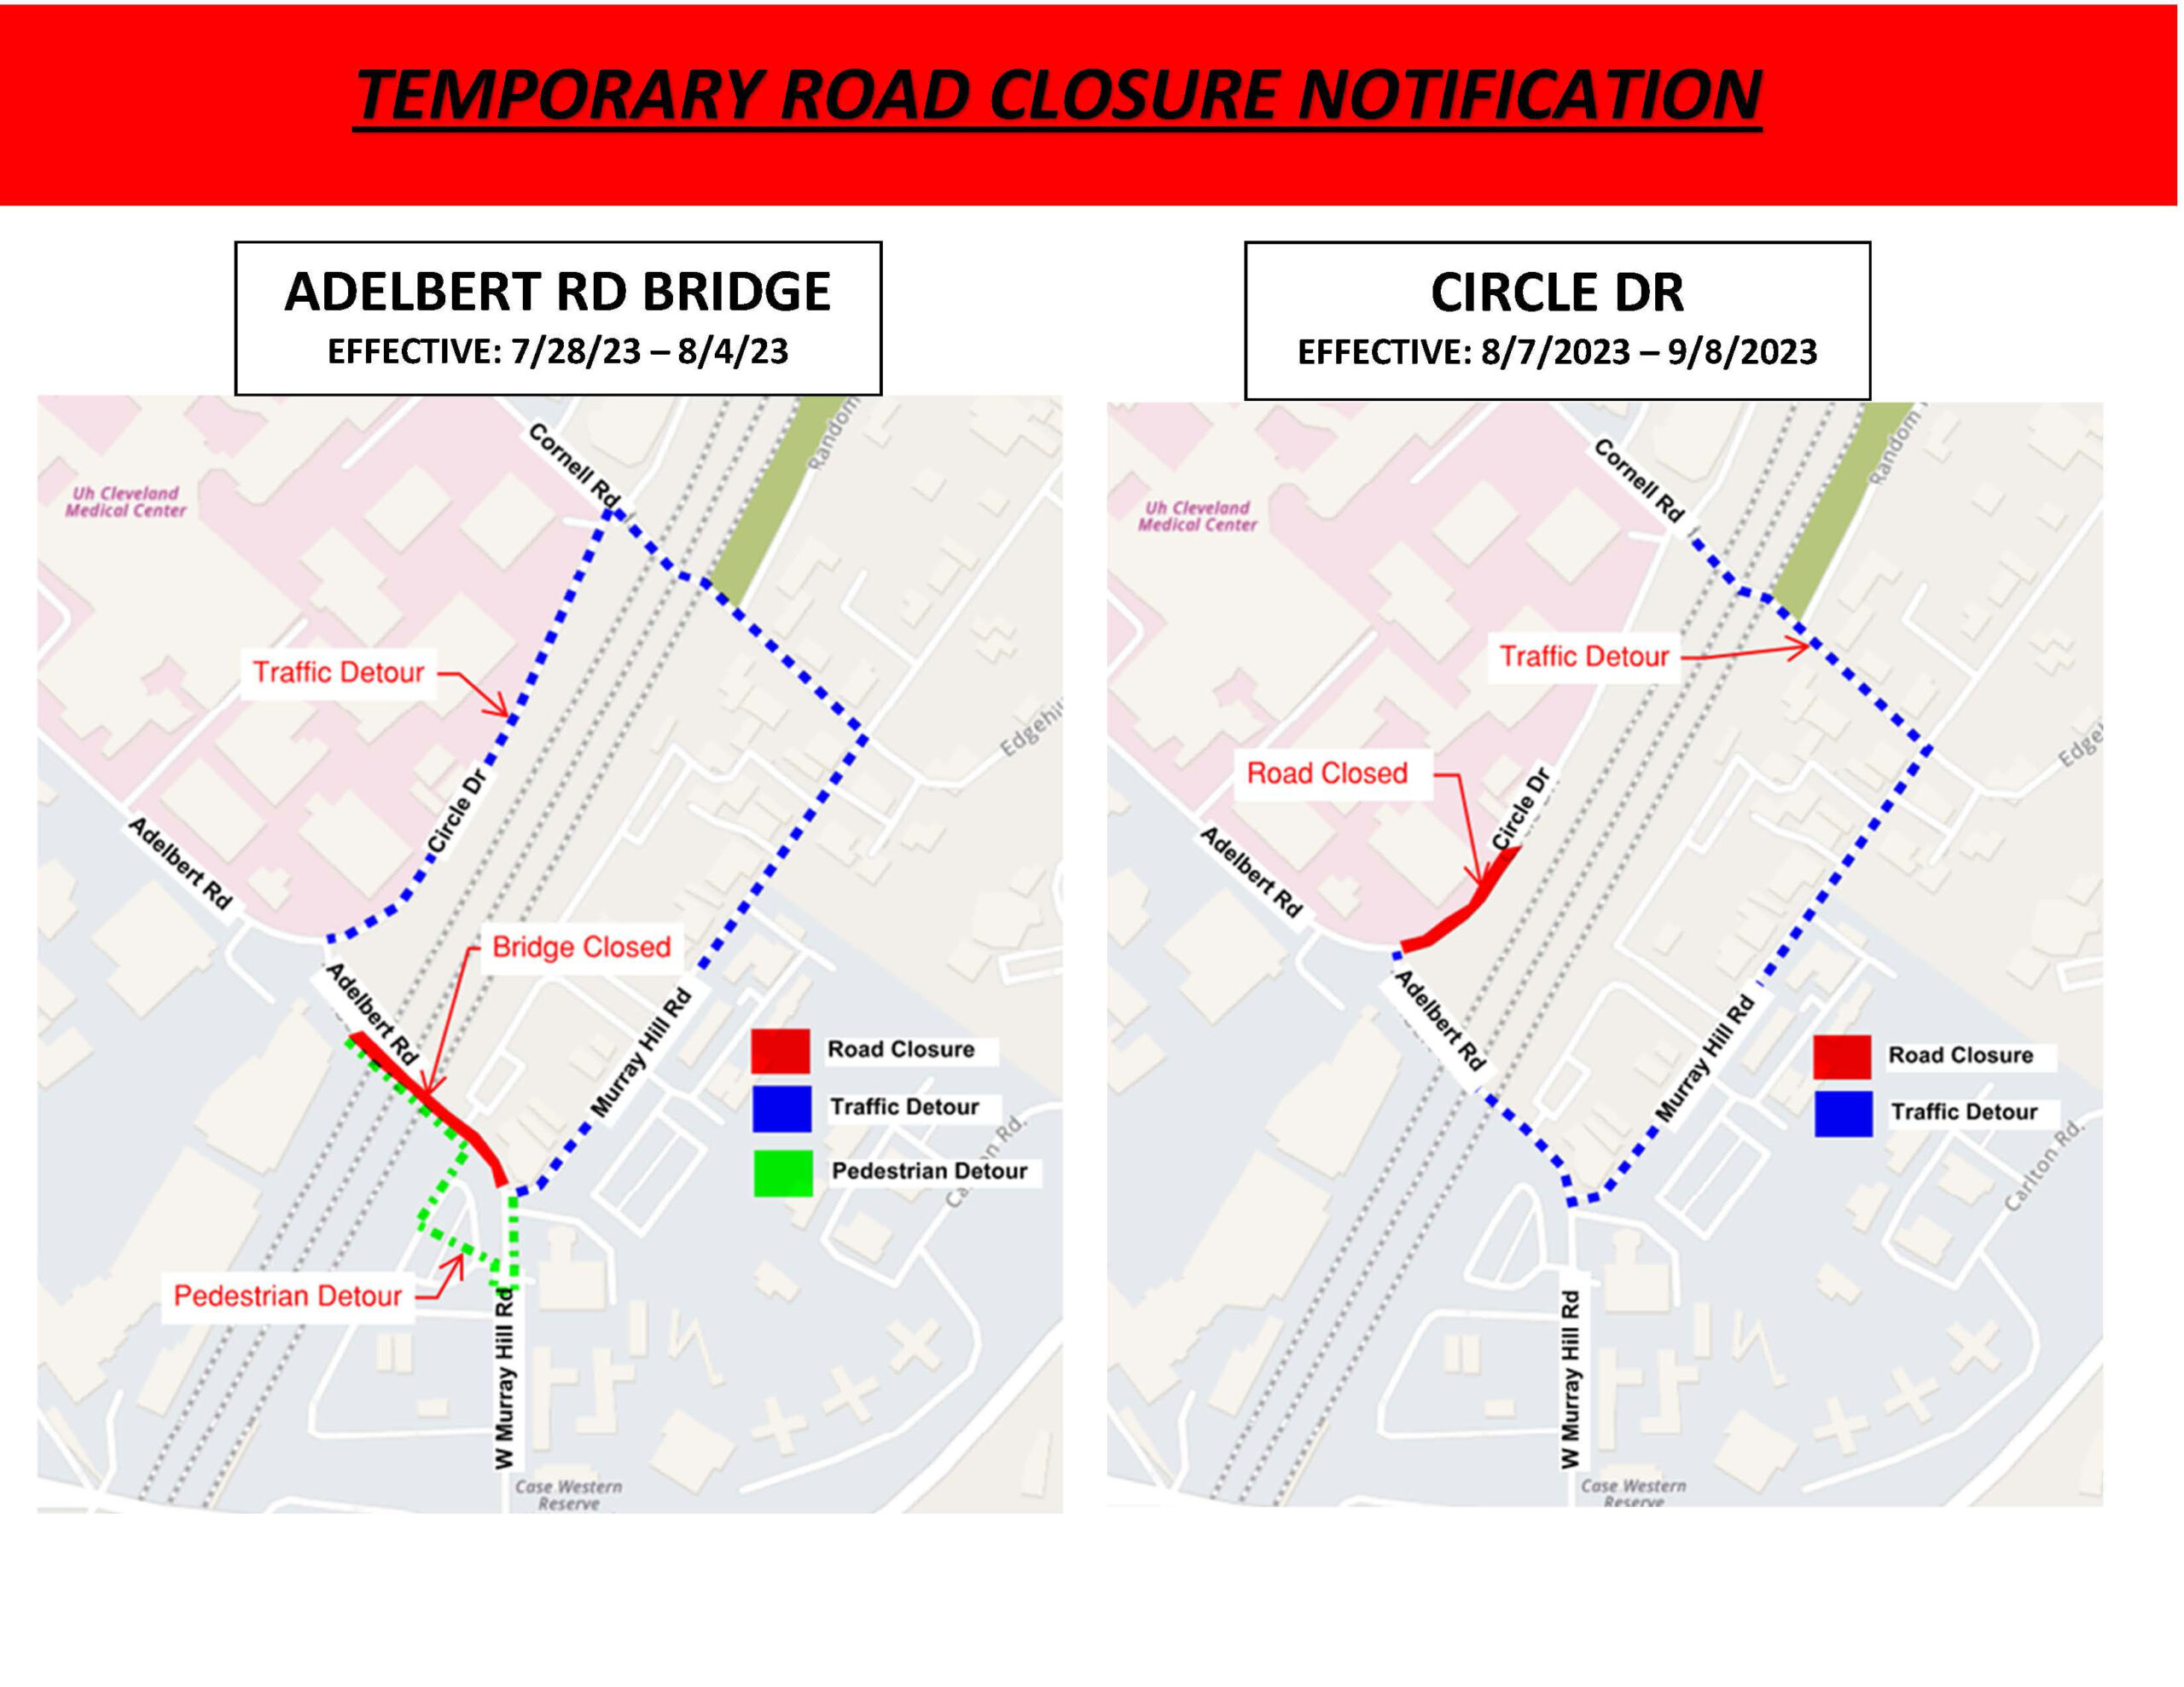 Illustration map of Adelbert Road Bridge and Circle Drive closures and the relevant detours